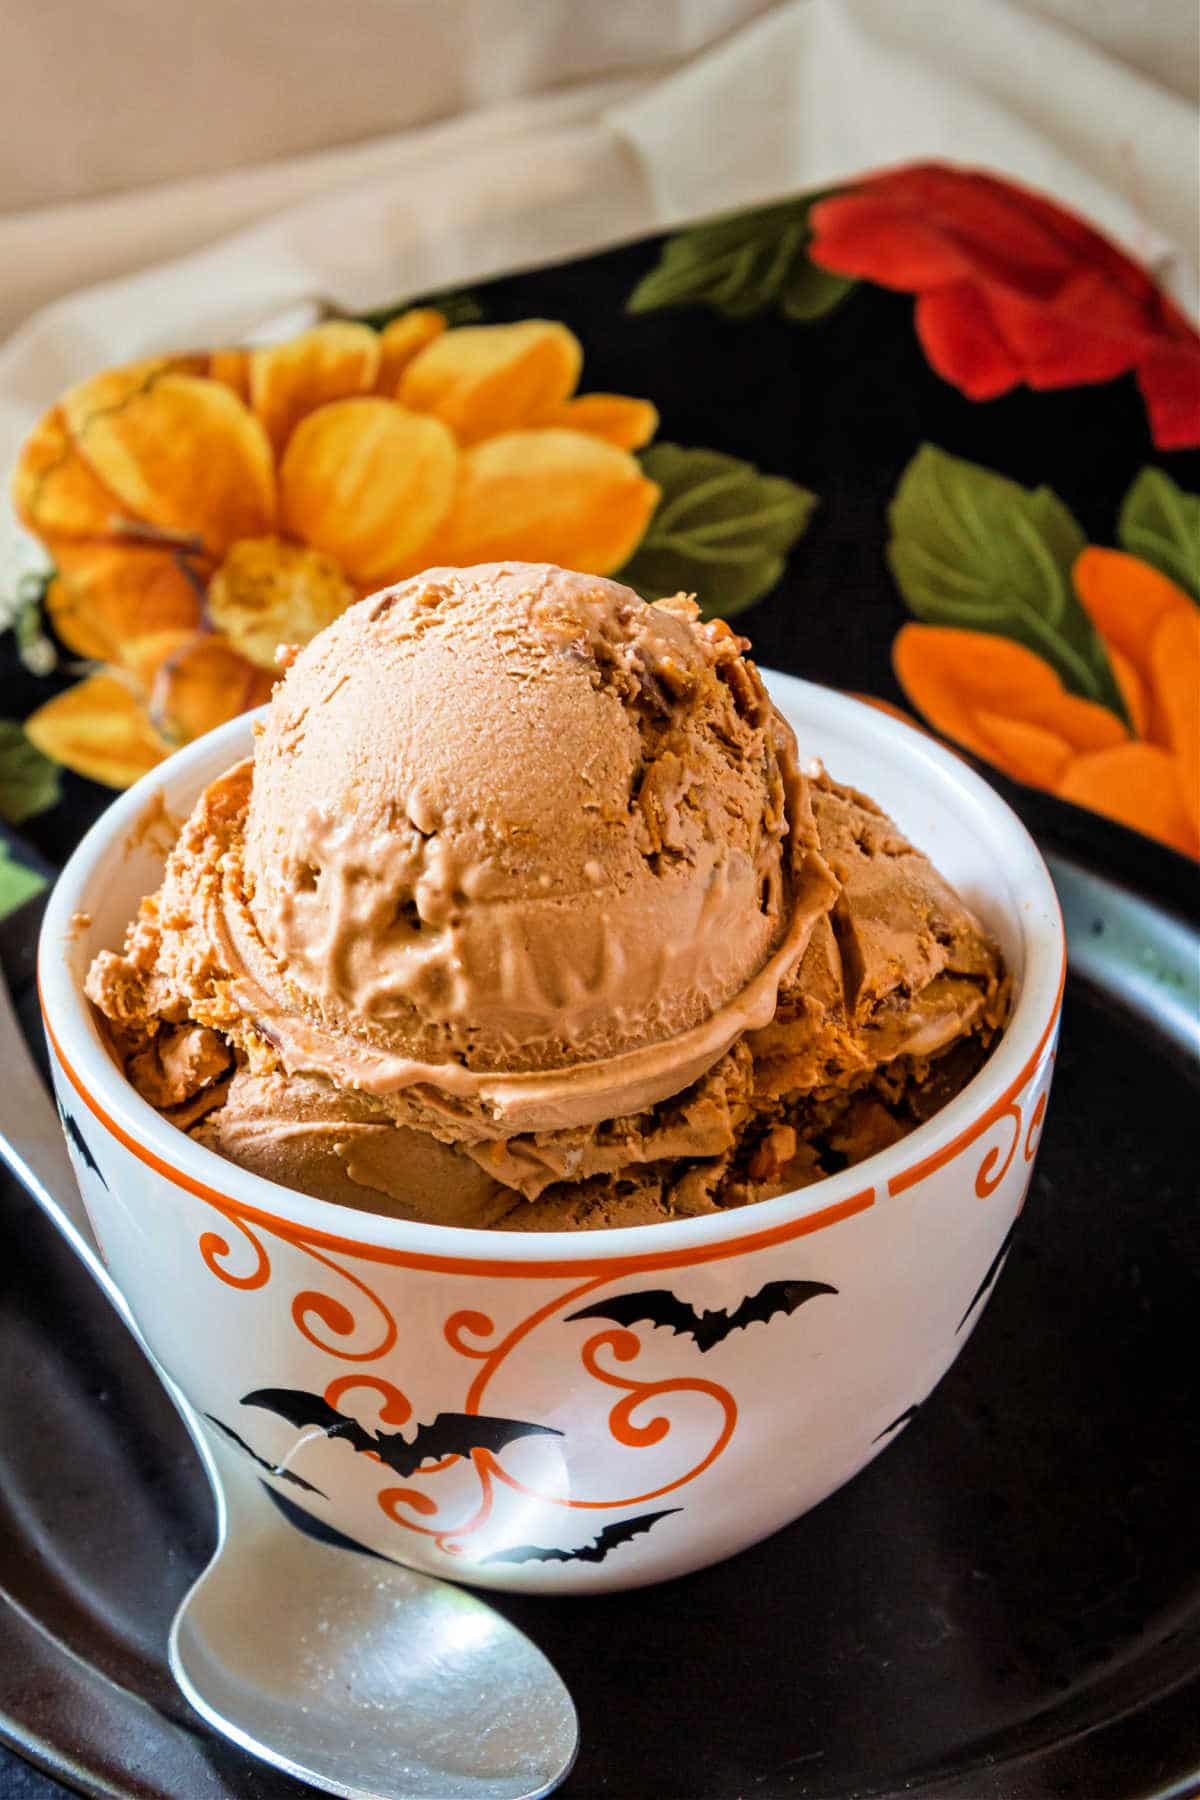 A white dish decorated with orange swirls and black bats filled with scoops of ice cream.